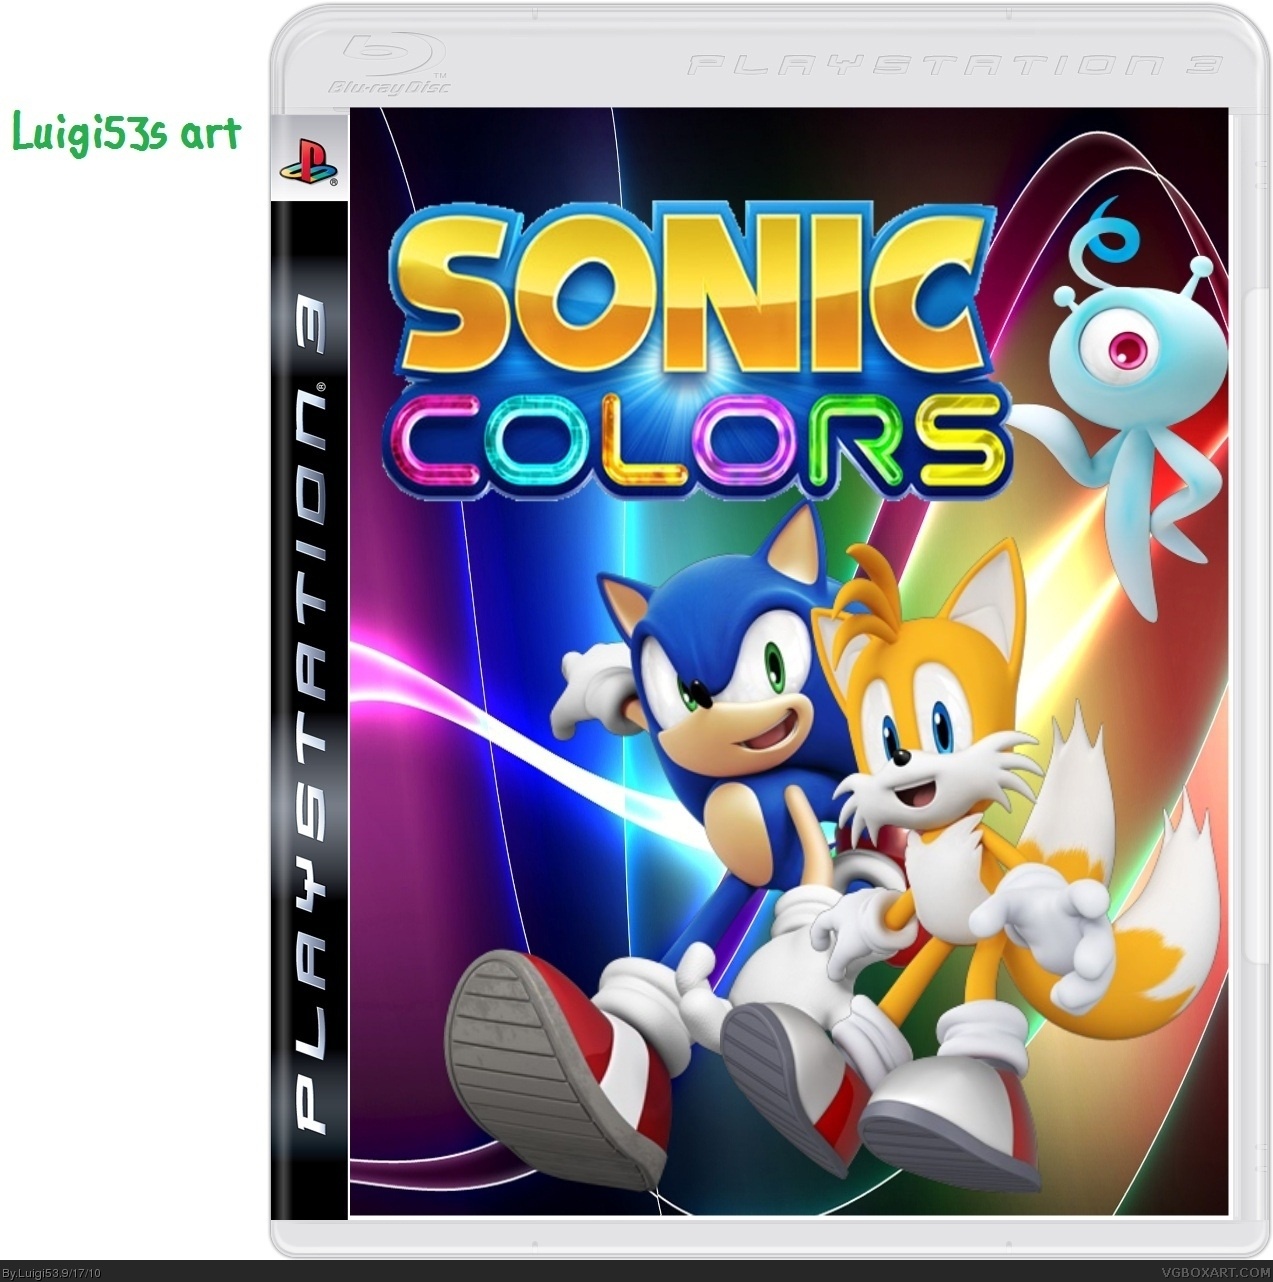 Sonic Colors box cover